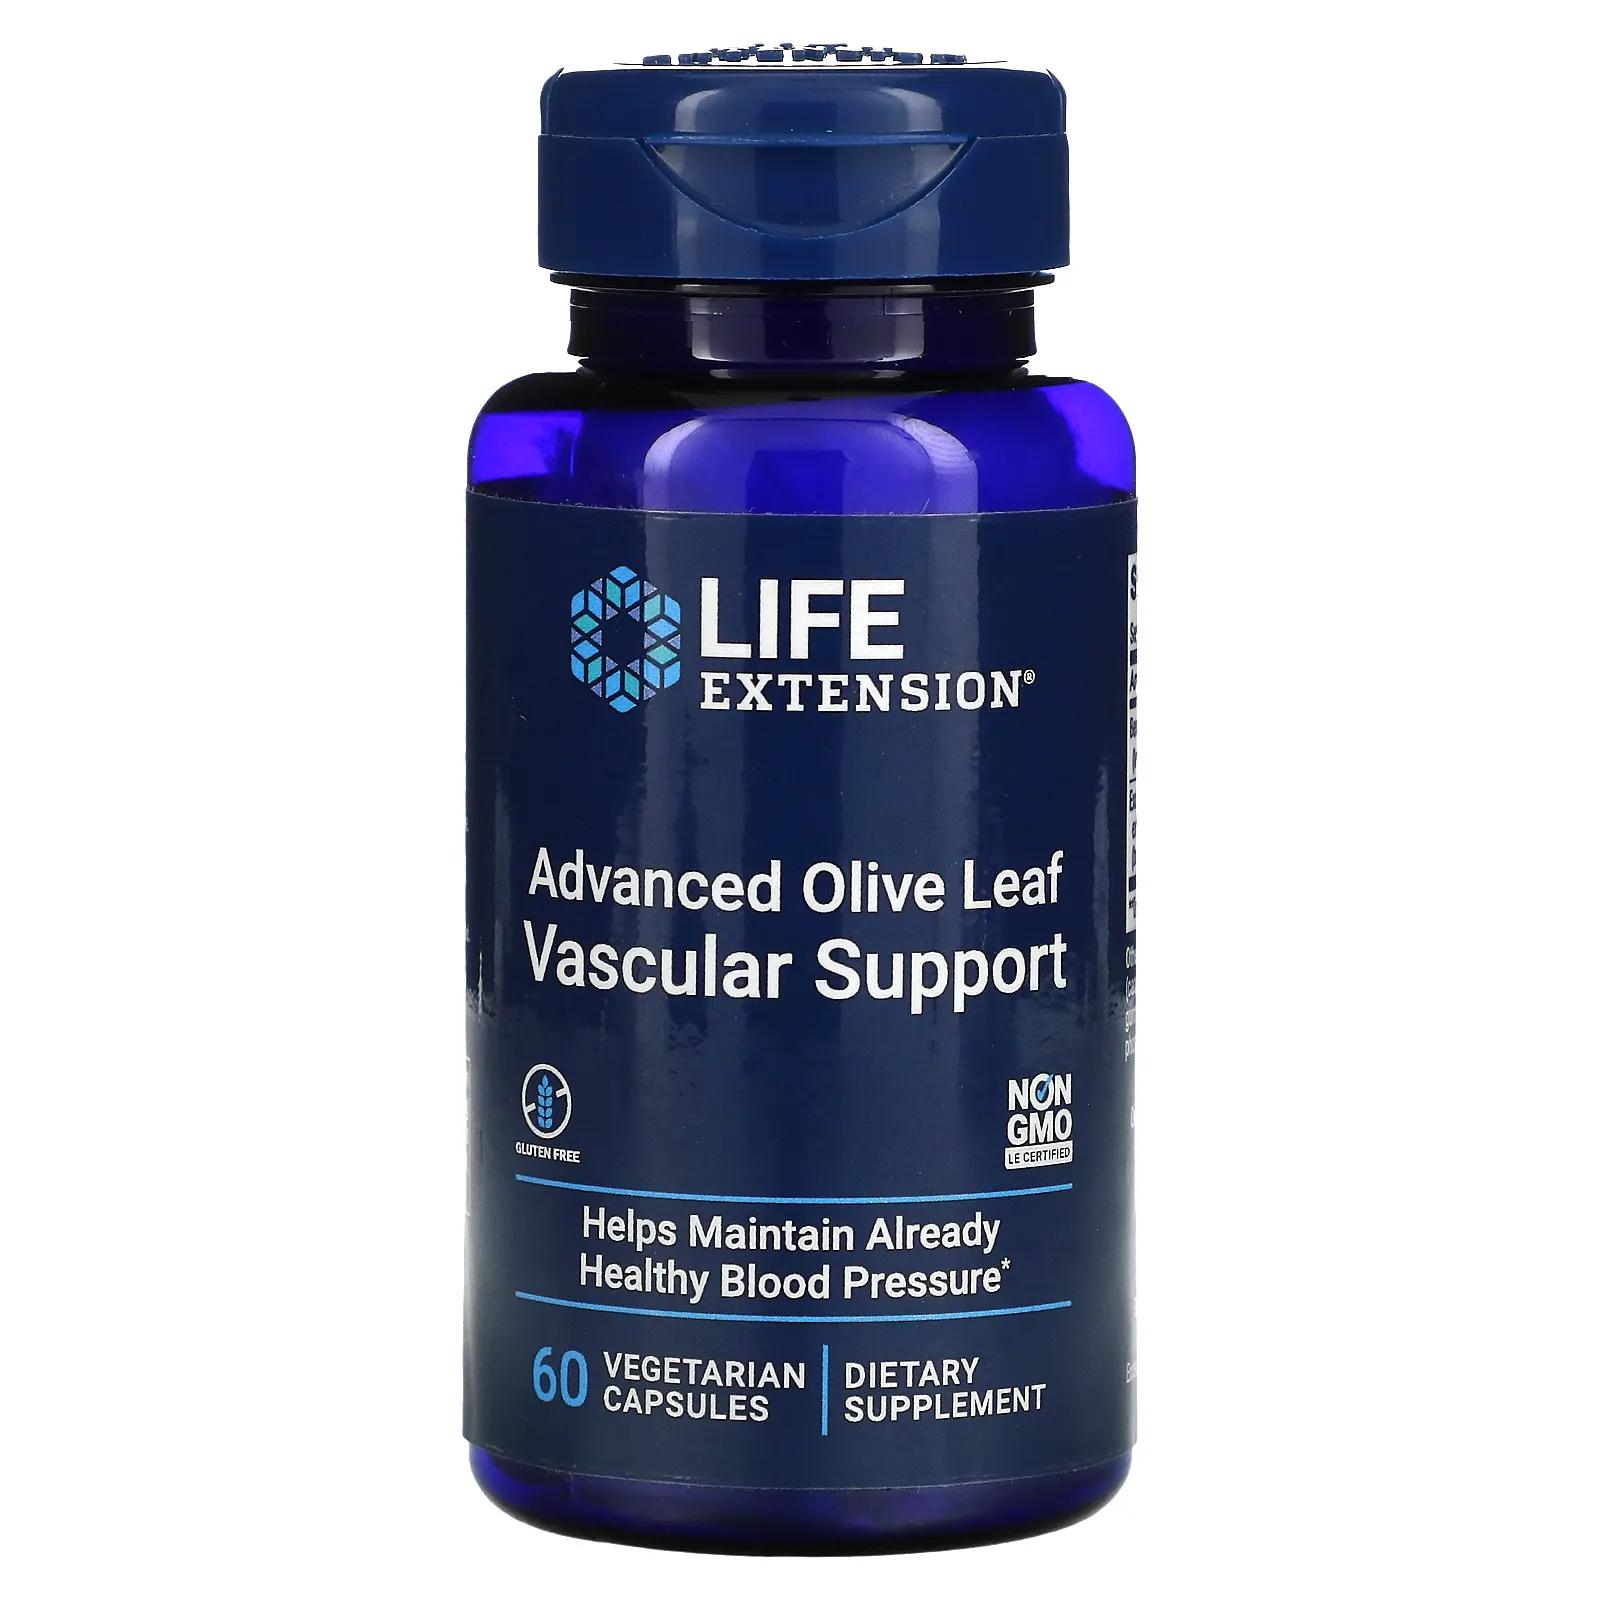 life extension life extension mix tablets 240 tablets Life Extension Advanced Olive Leaf Vascular Support with Celery Seed Extract 60 Veggie Caps